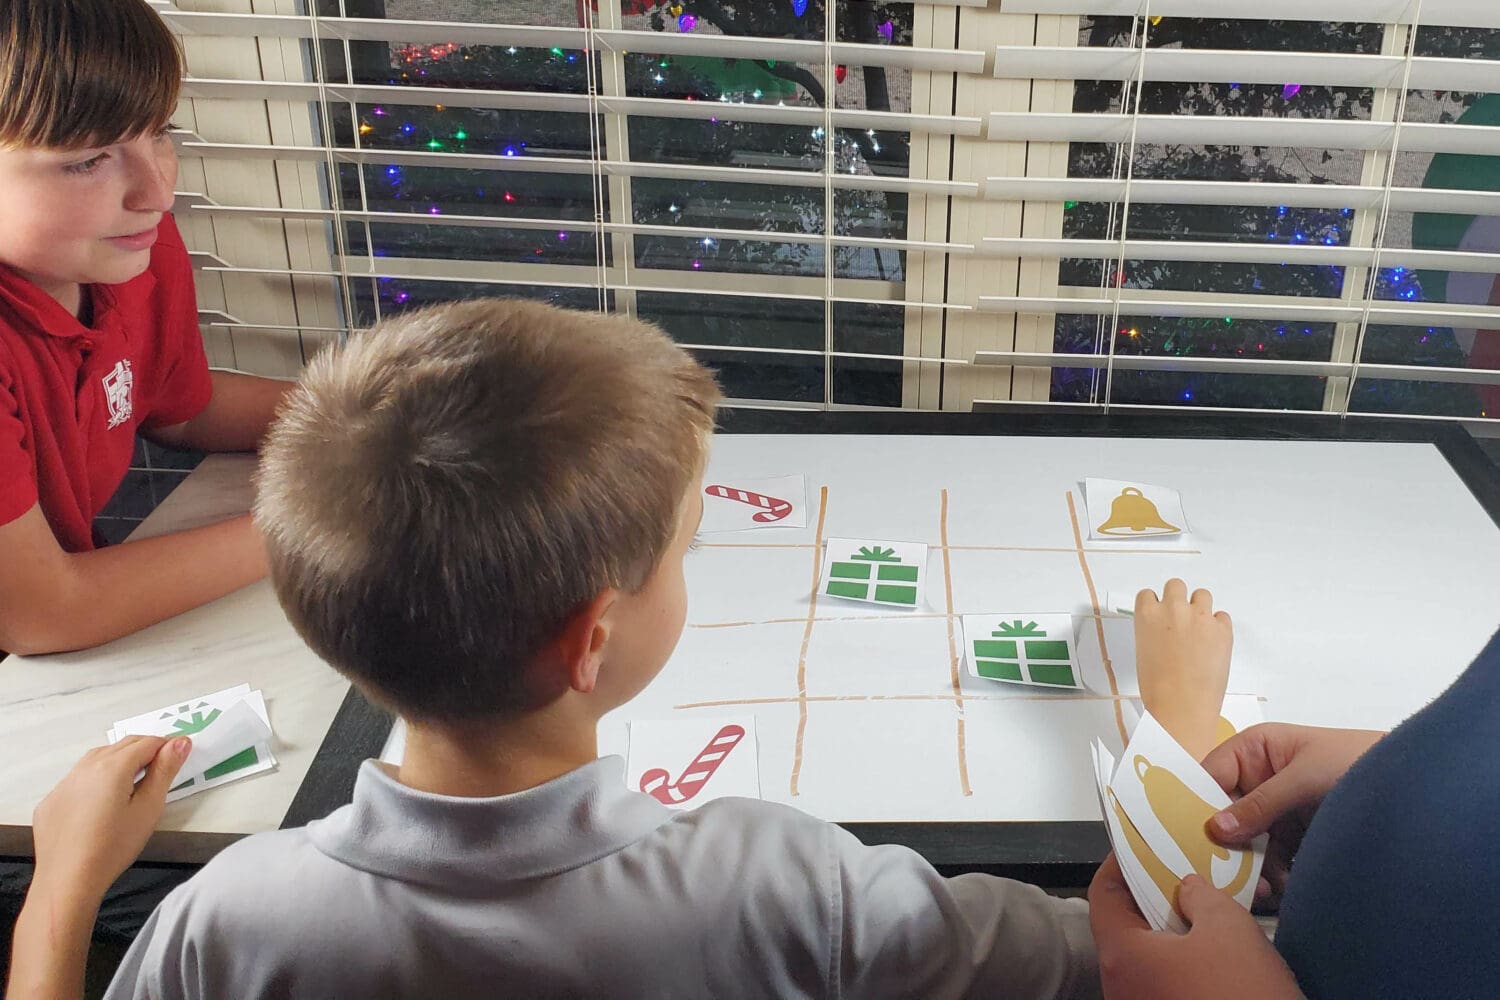 Christmas Tic Tac Toe - A fun 3 player Tic Tac Toe (or 3 teams) with symbols for the shepherds, angels, and wise men and lots of repetition for a single song, mix of songs, or 3 Christmas songs of your choice! Fun singing time idea or printable game for families.